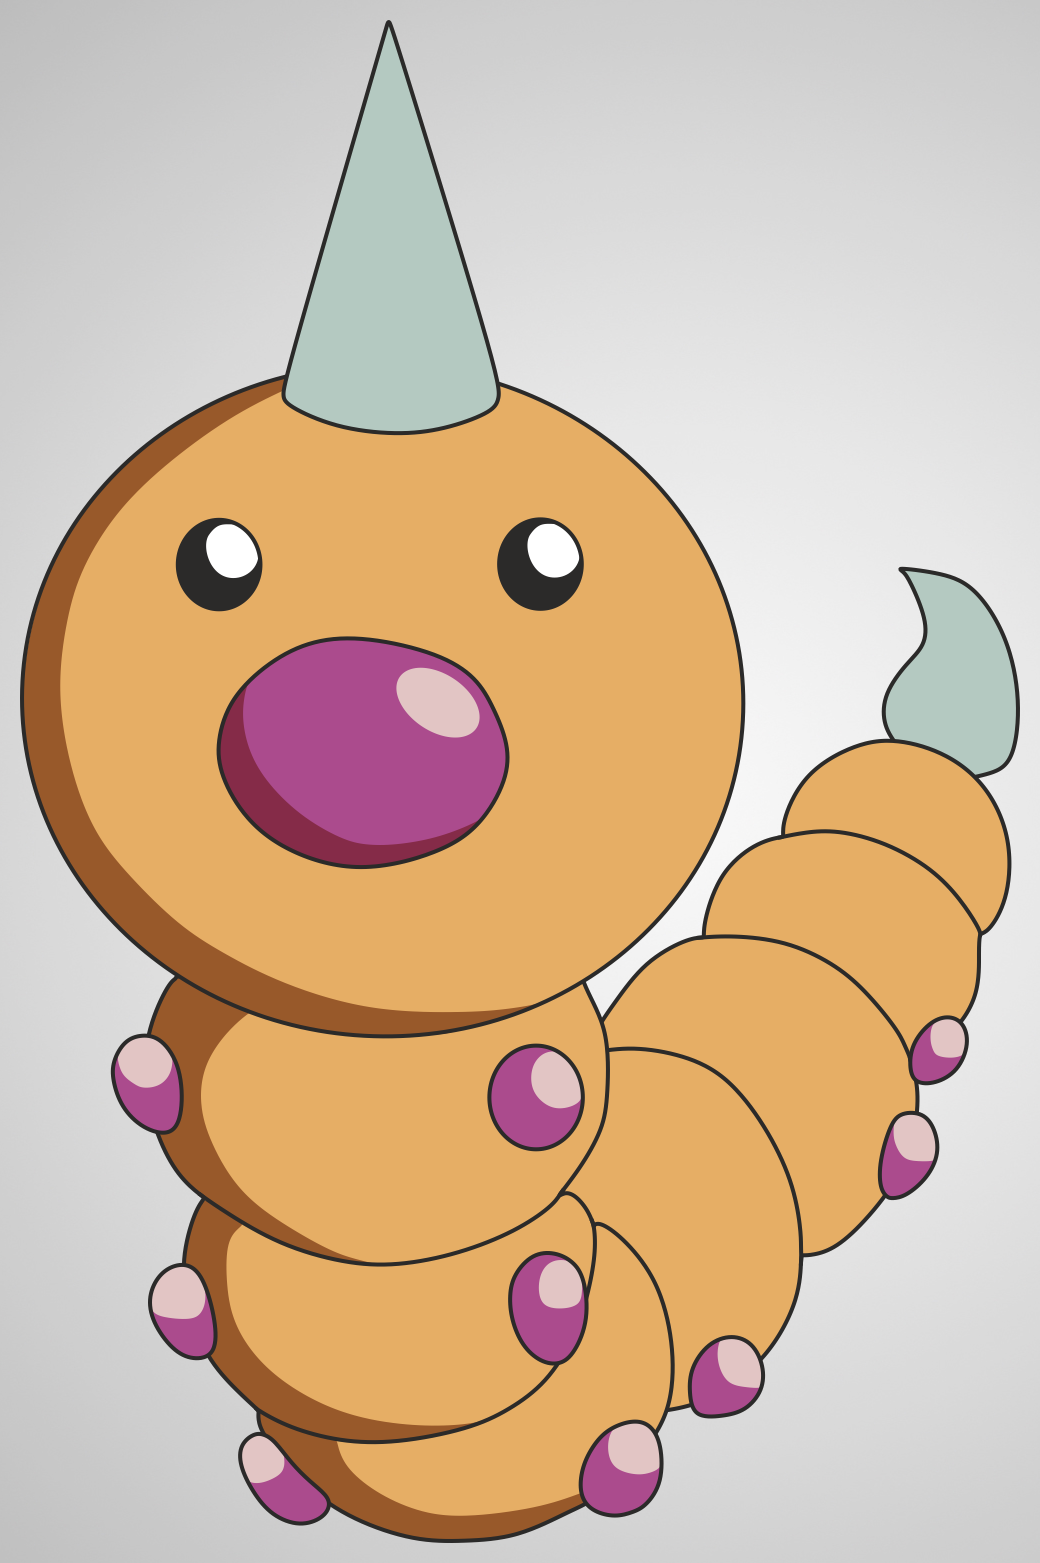 013_weedle_by_scope66-d4v65j9.png